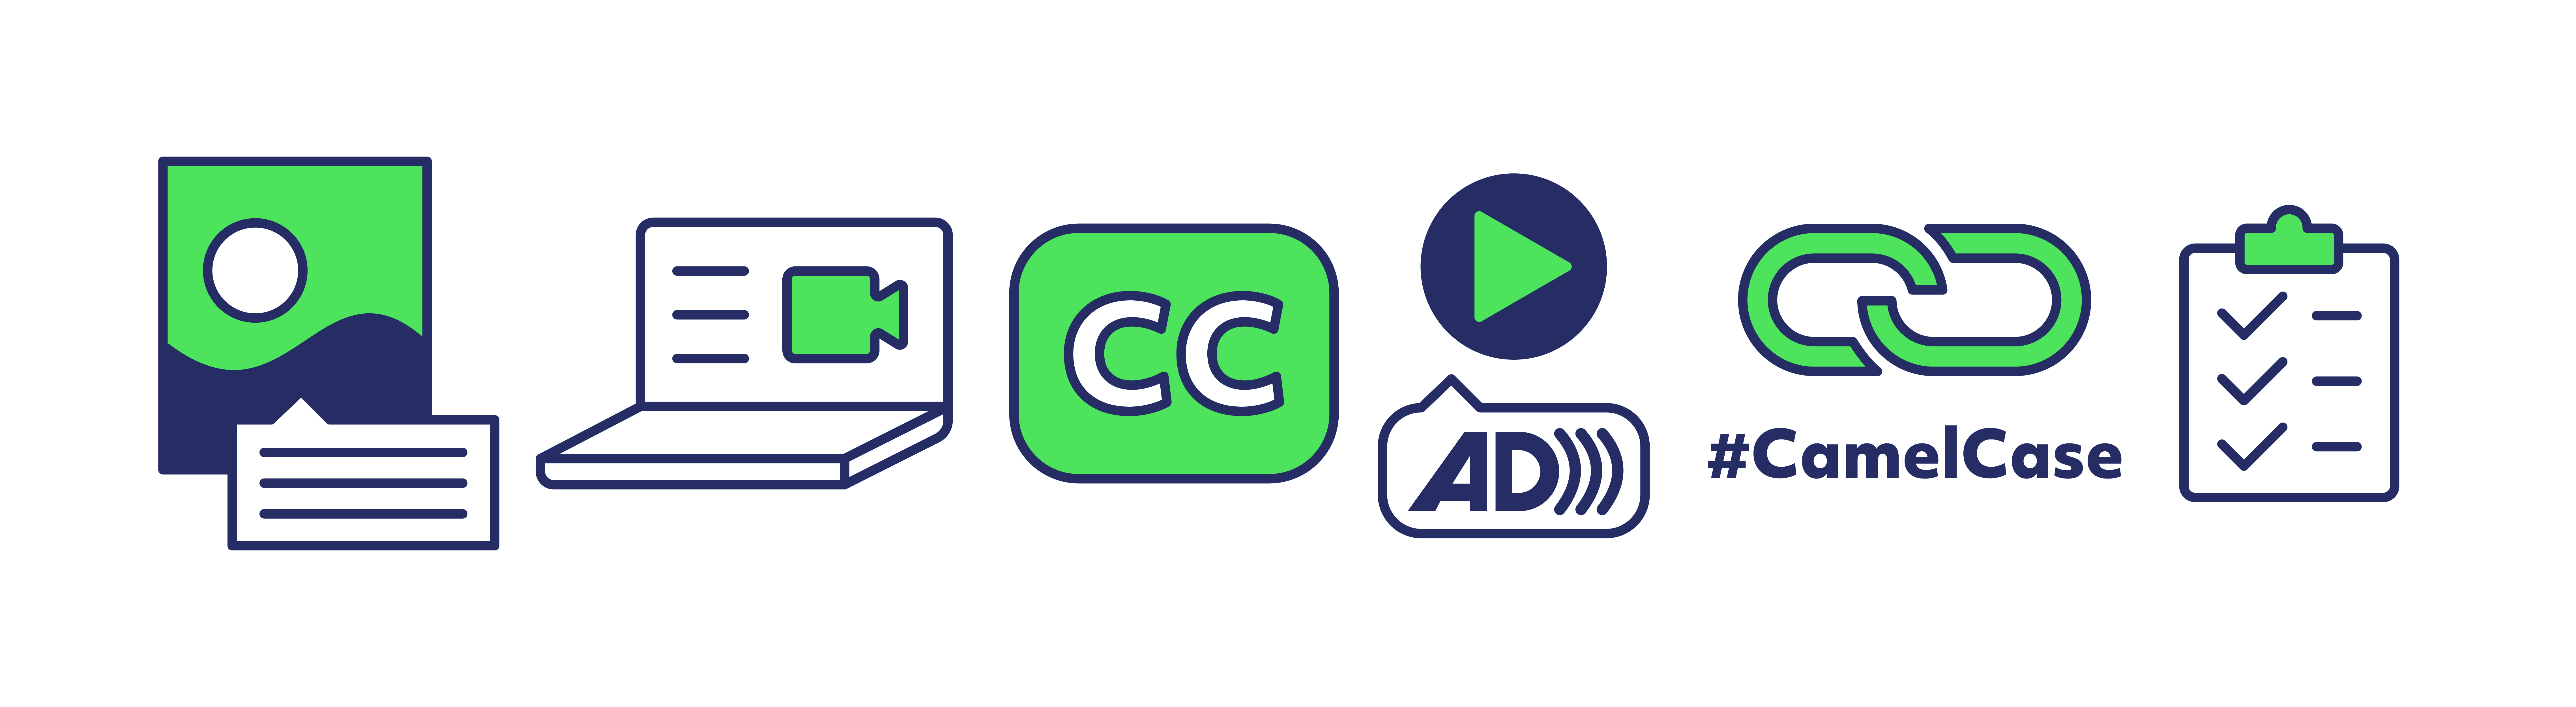 A row of icons representing various elements of digital accessibility including alt text, virtual meetings, closed captions, Audio Description, Camel Case hashtags, and a checklist.